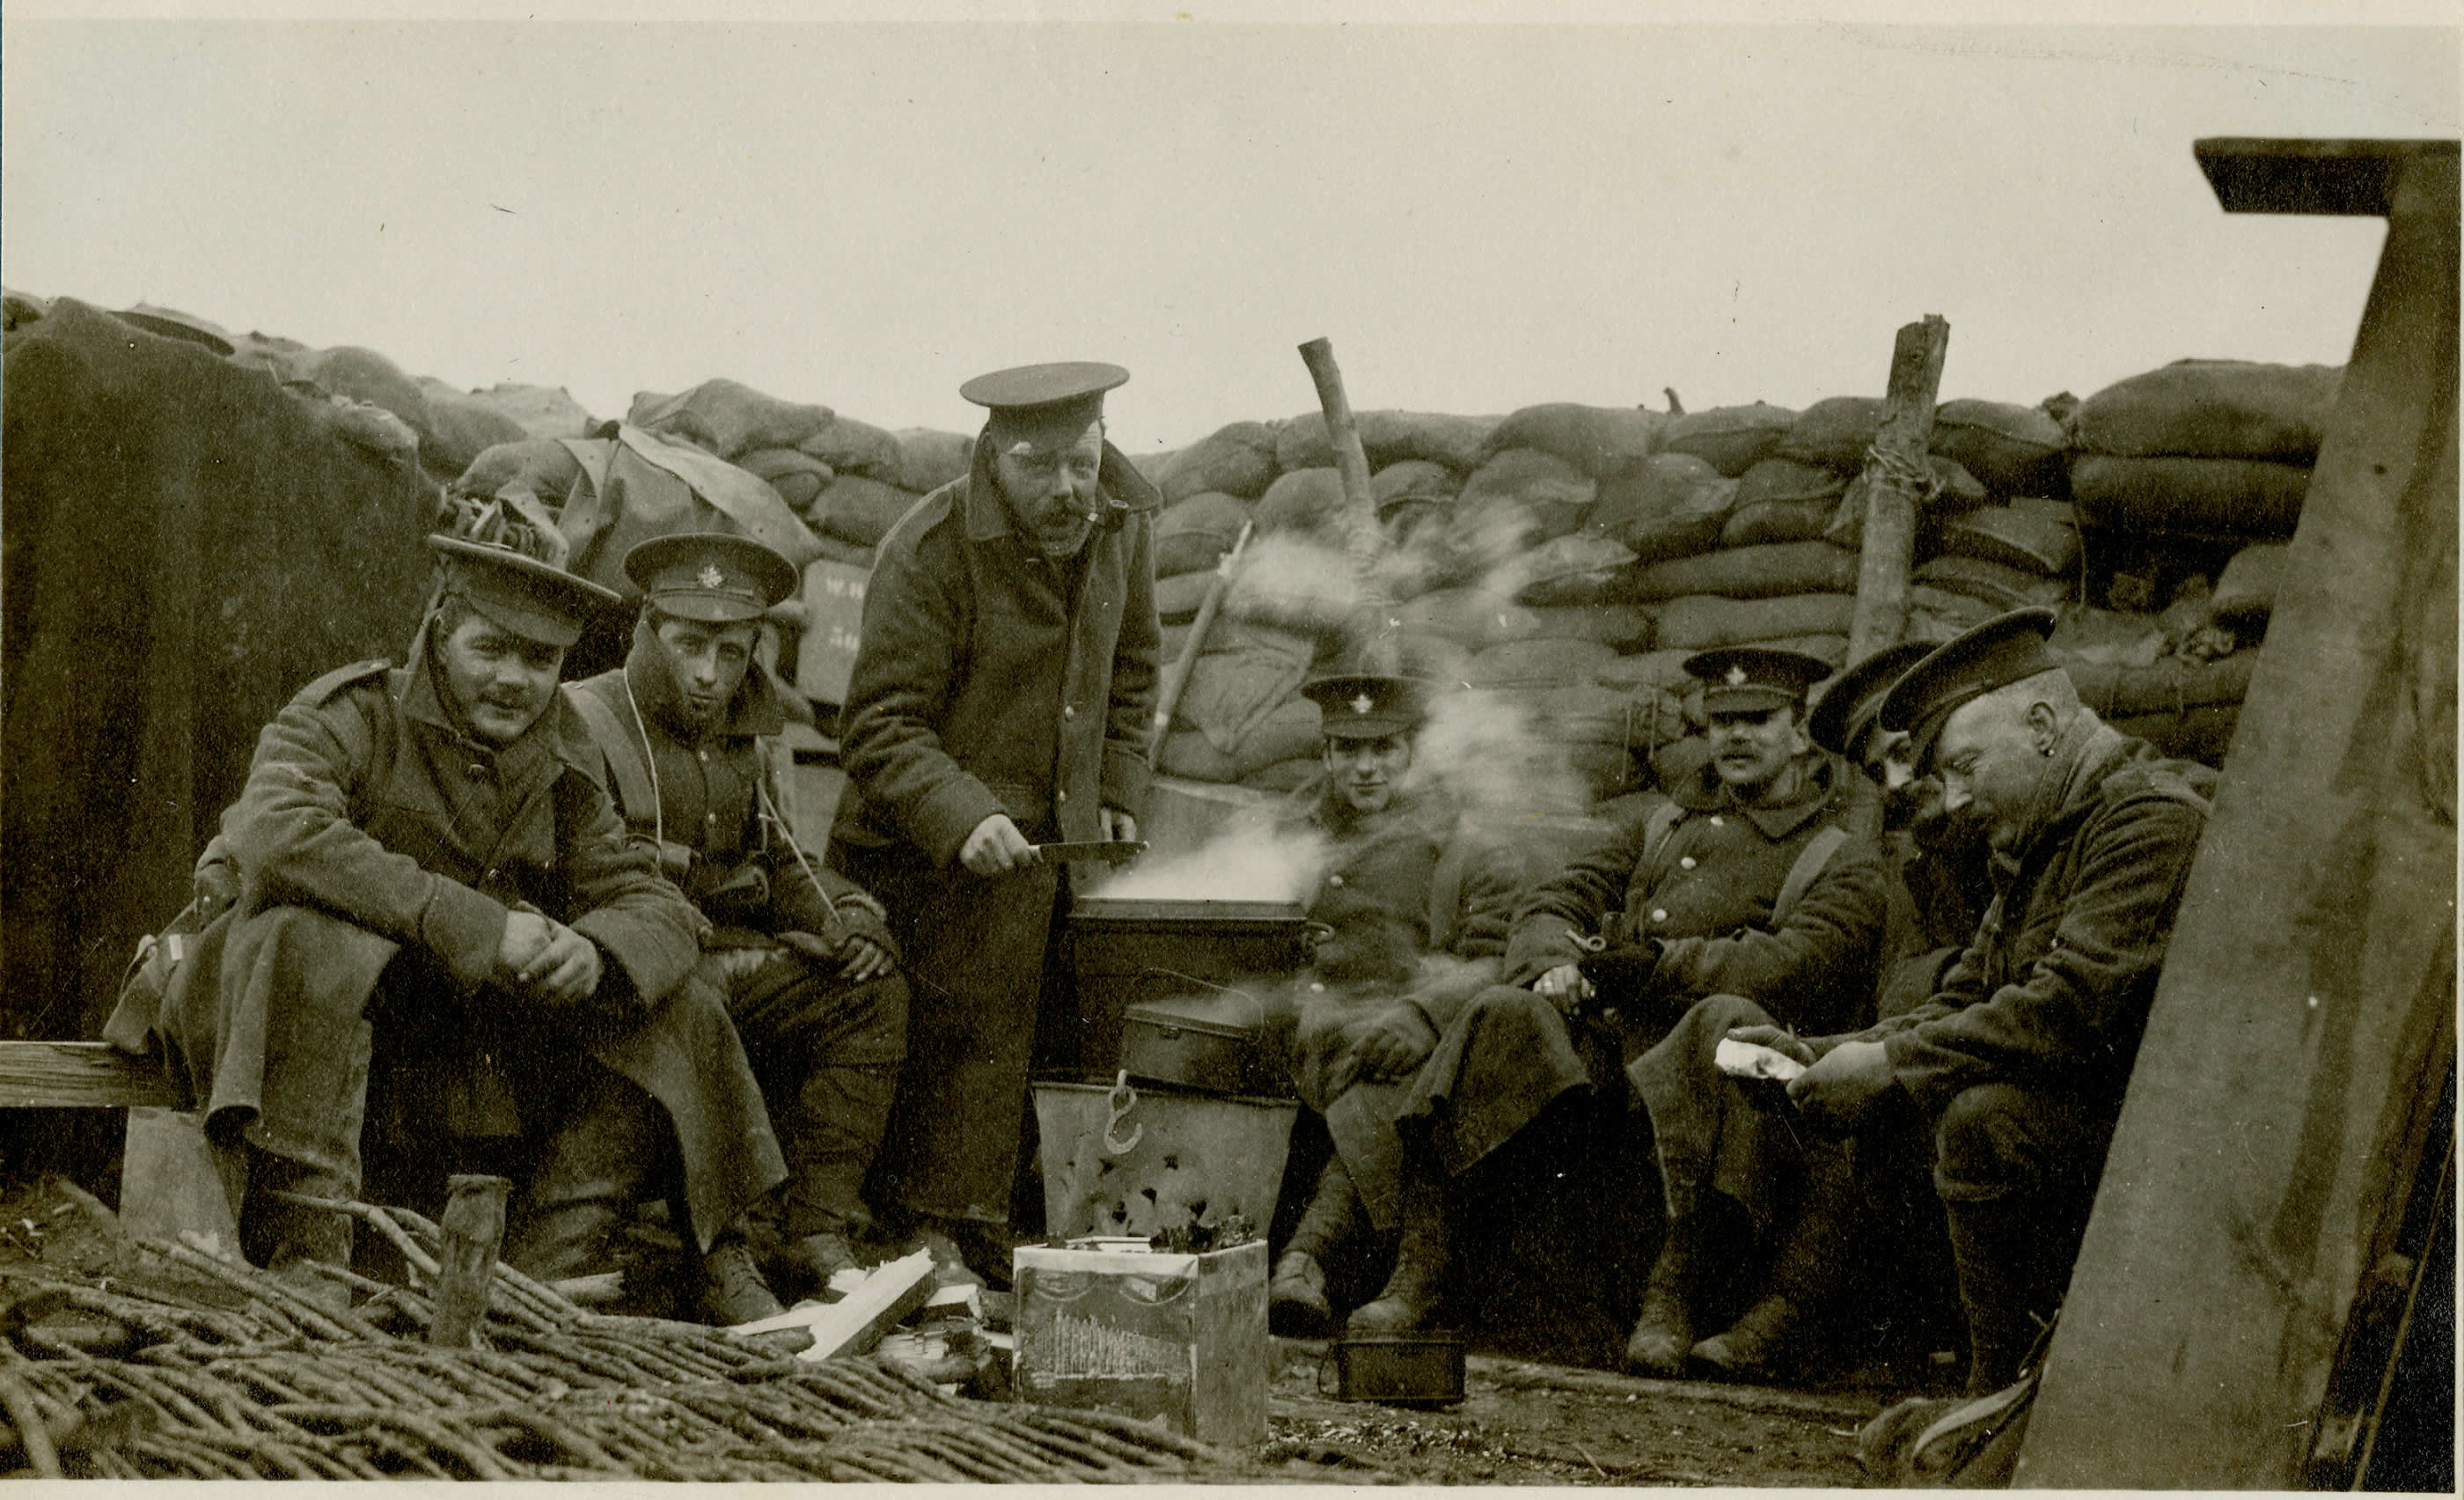 How was discipline maintained in the trenches in World War I?